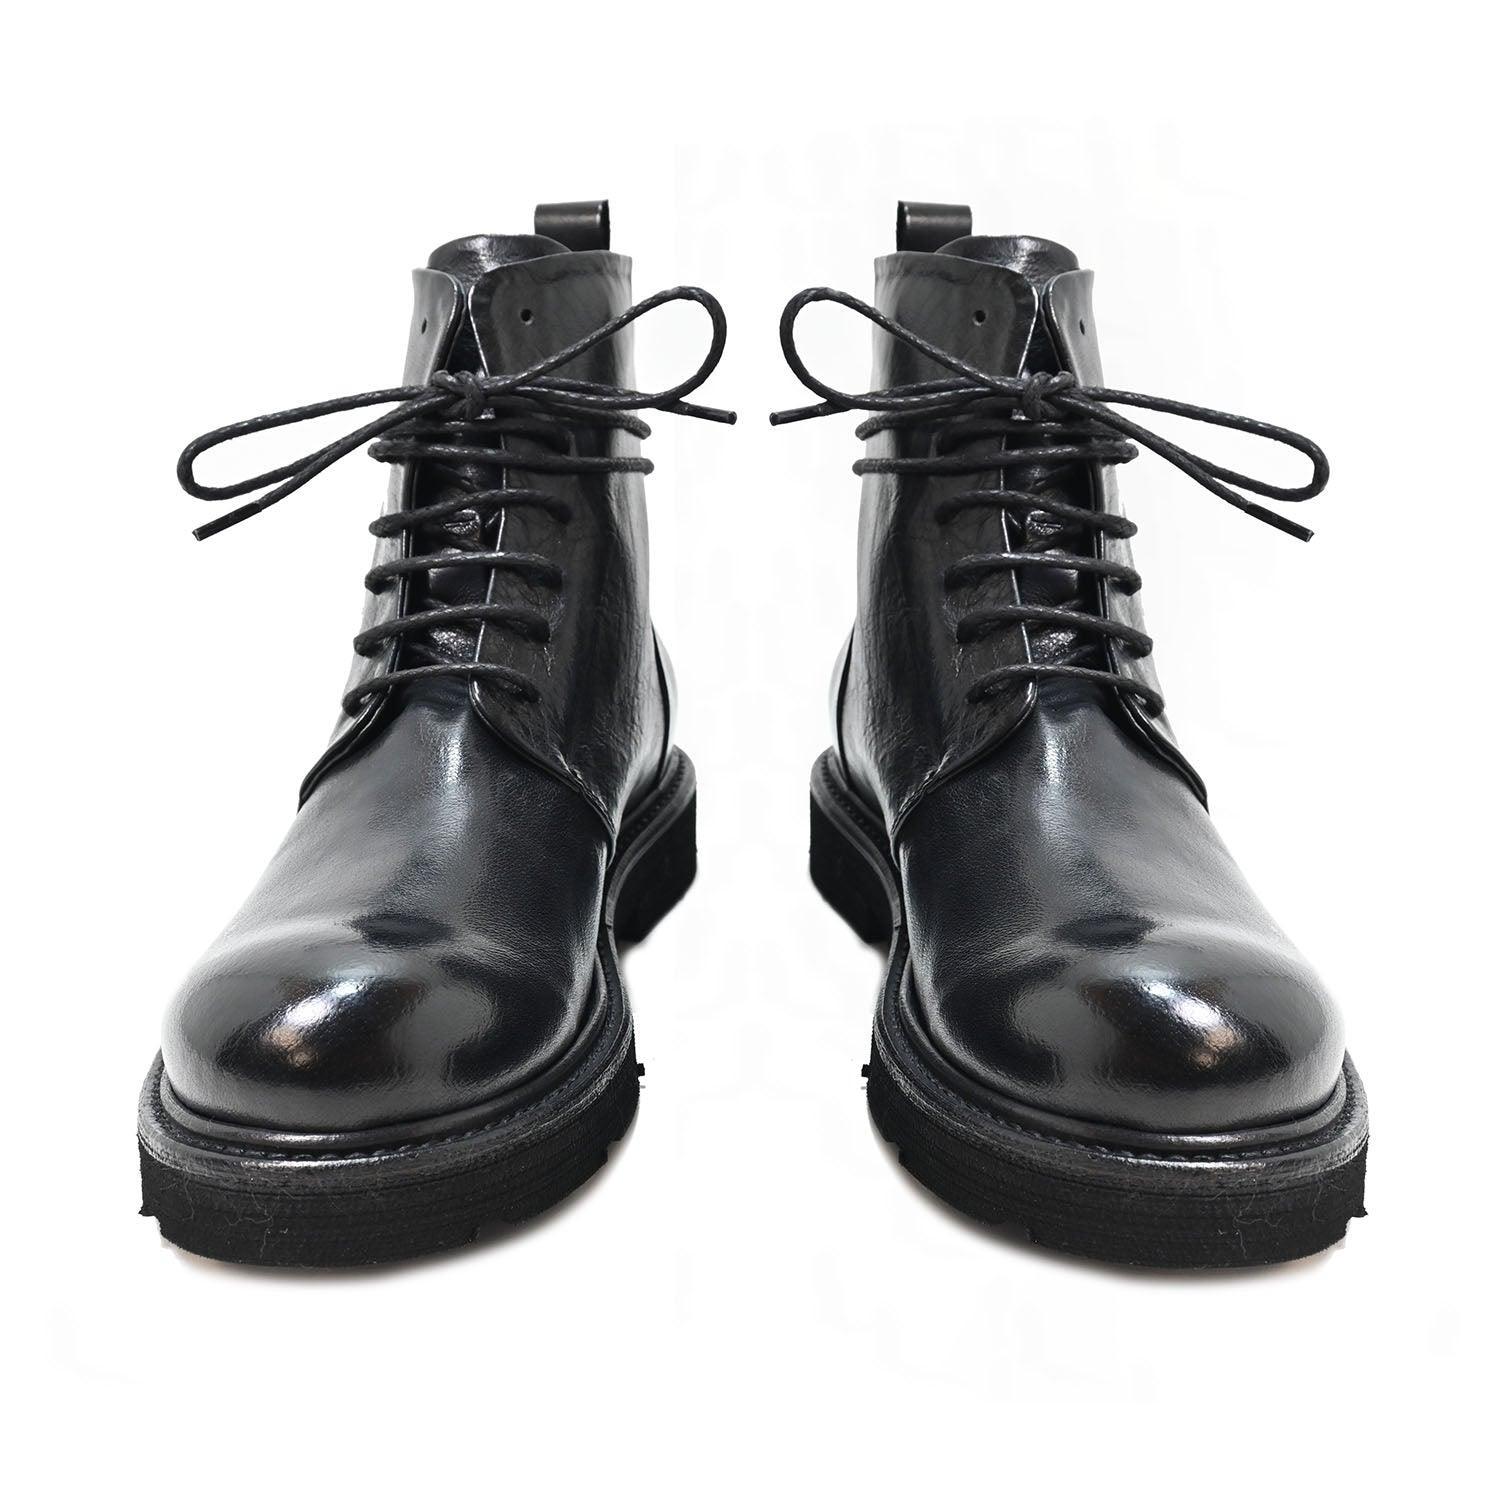 ALBA 03 - lace-up ankle boots leather black - History541